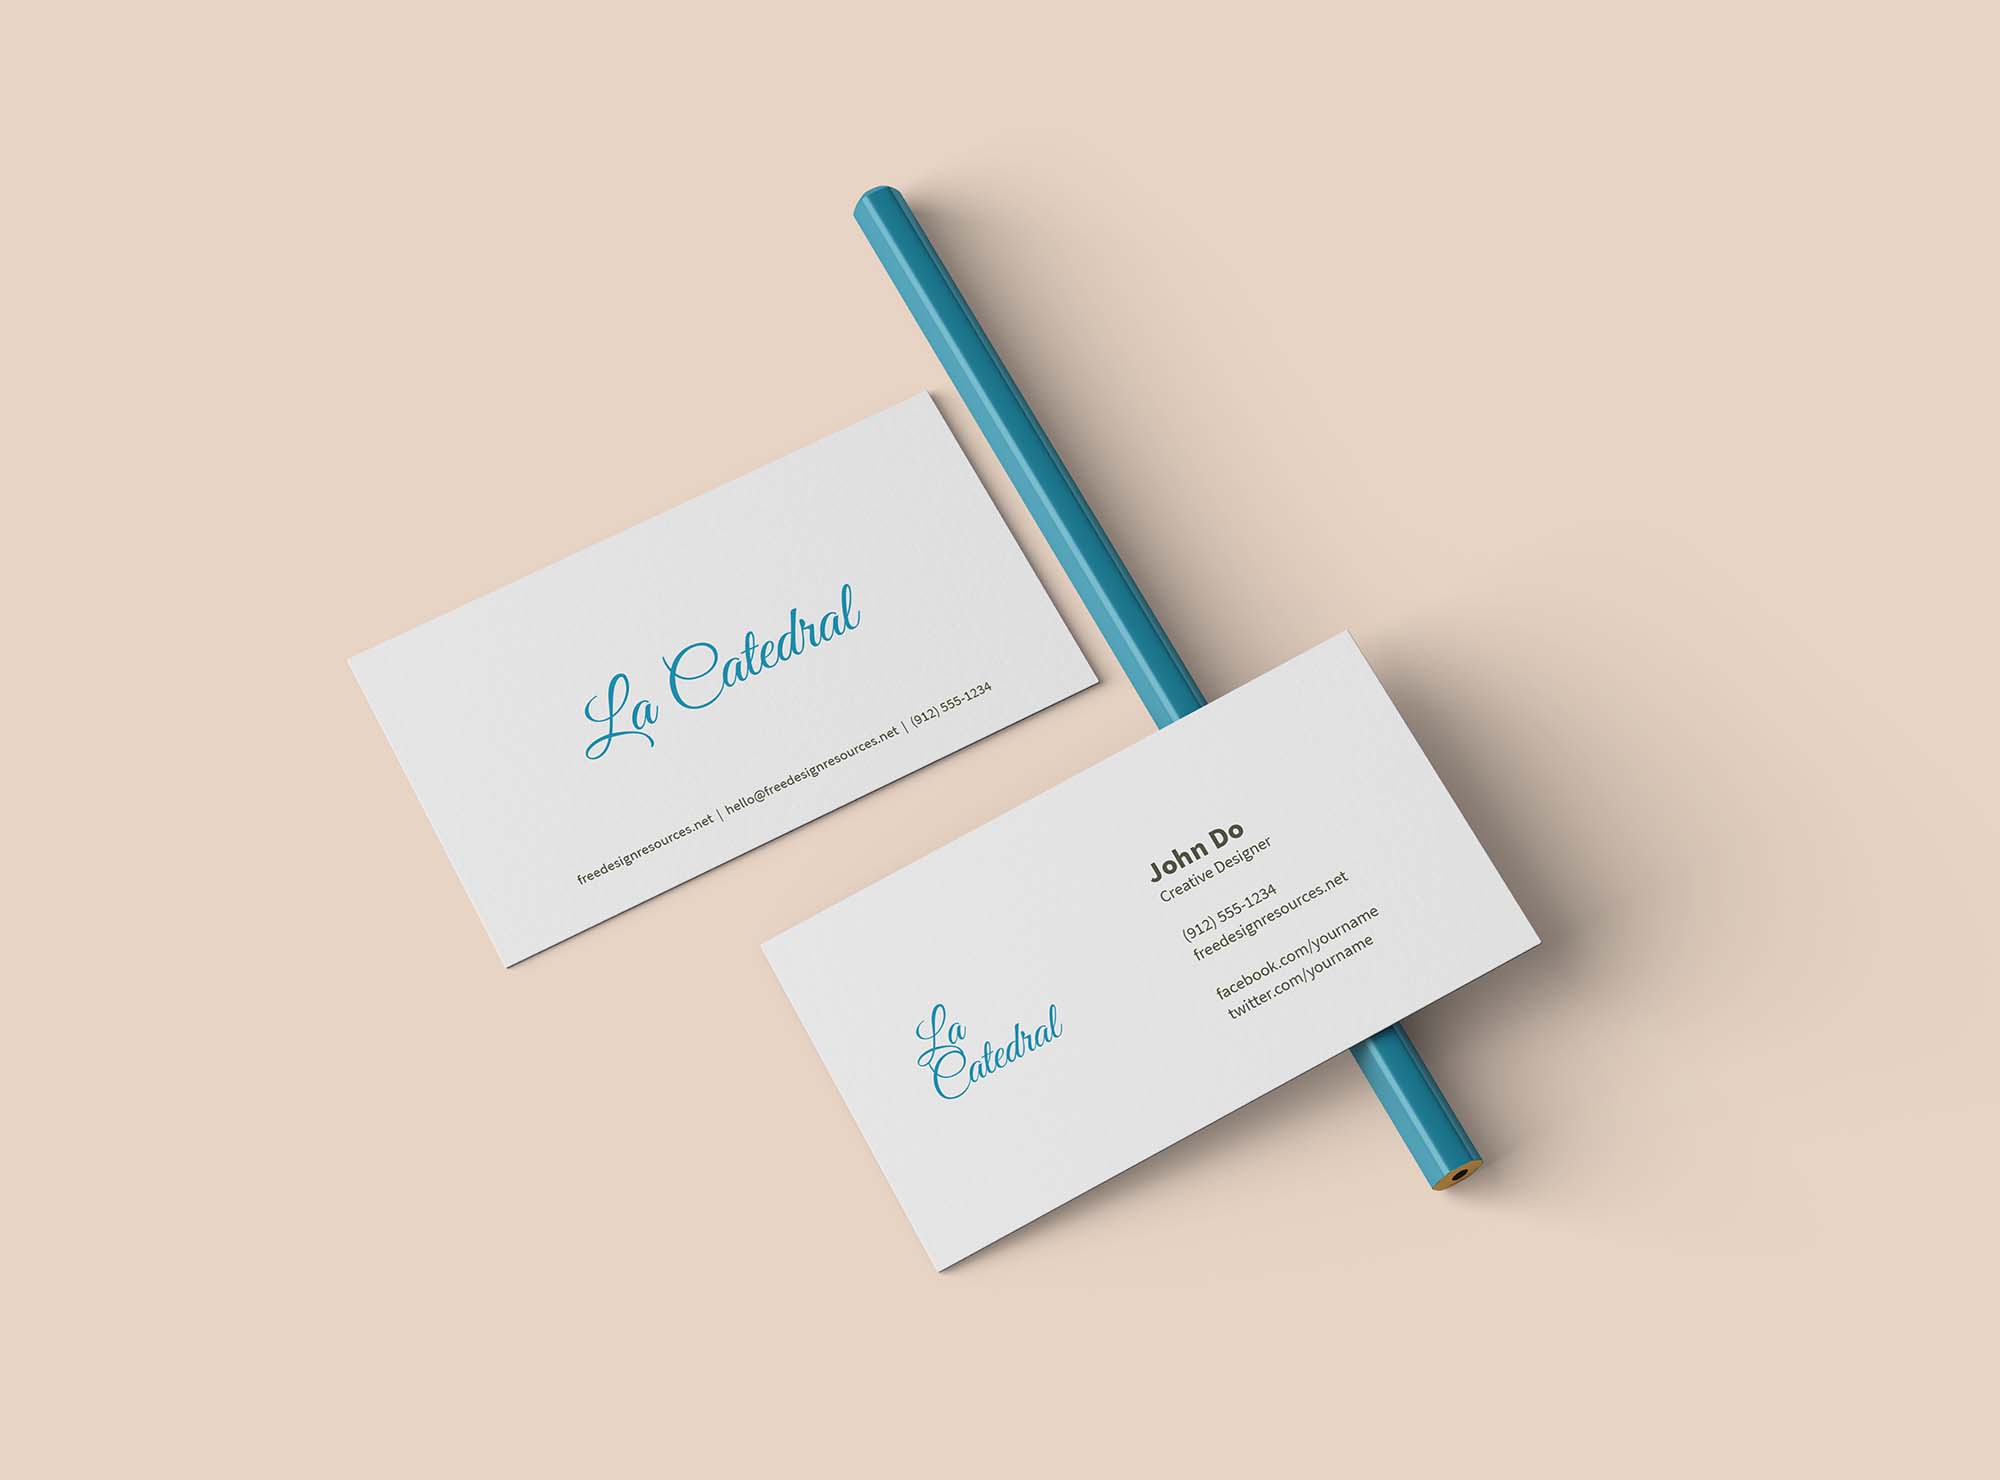 Two Business Card Mockup with Pencil